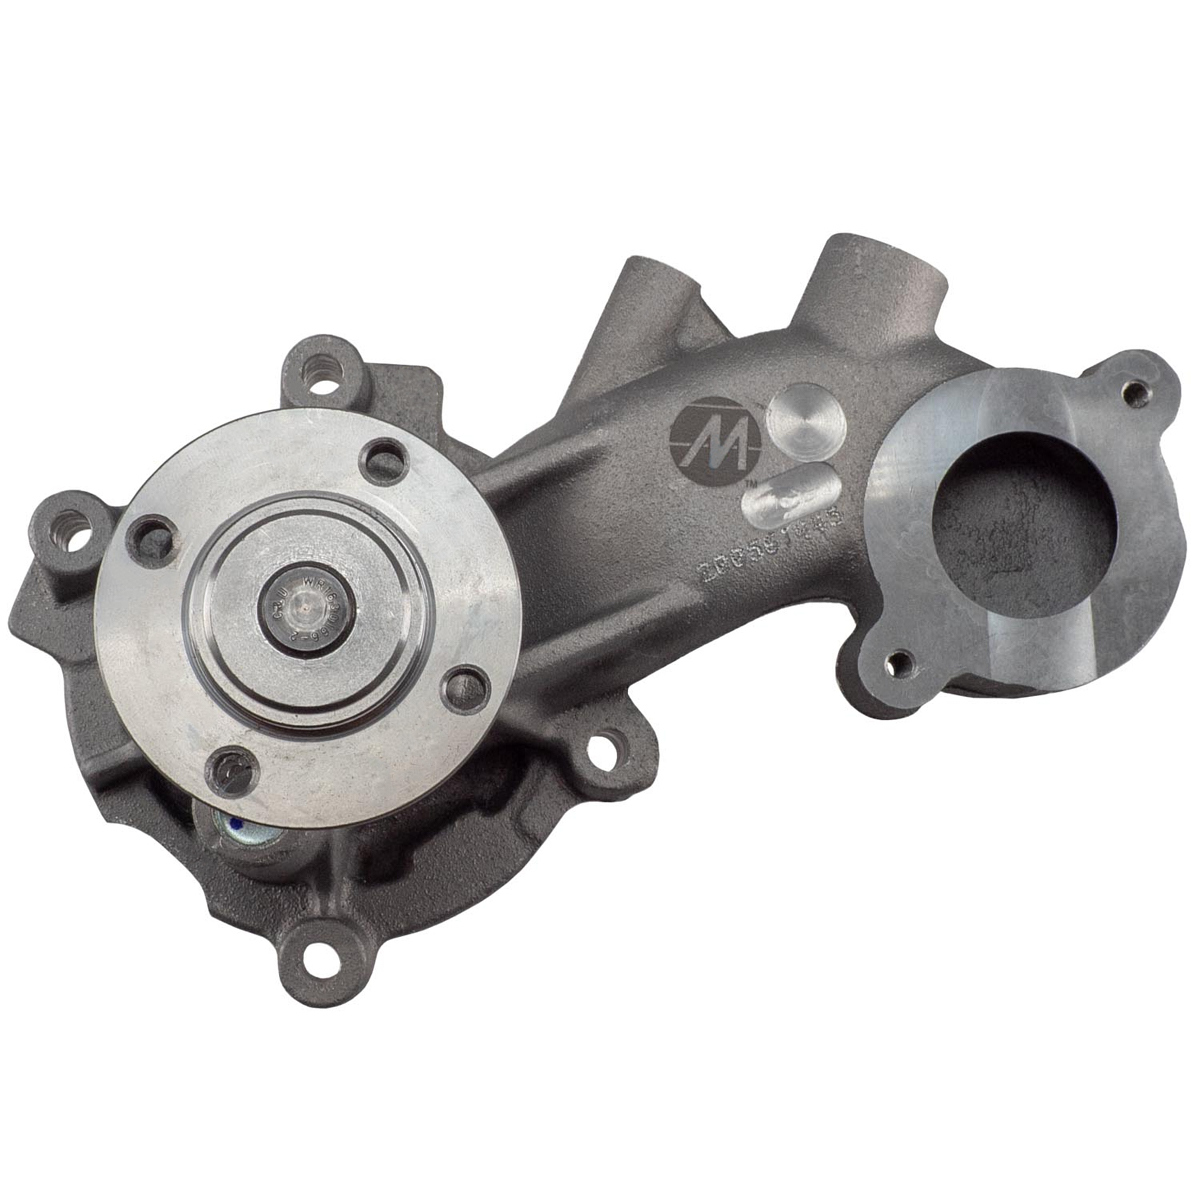 Melling Performance MWP-523 Water Pump, Mechanical, 4.93 in Hub Height, Aluminum, Natural, Ford Coyote, Each